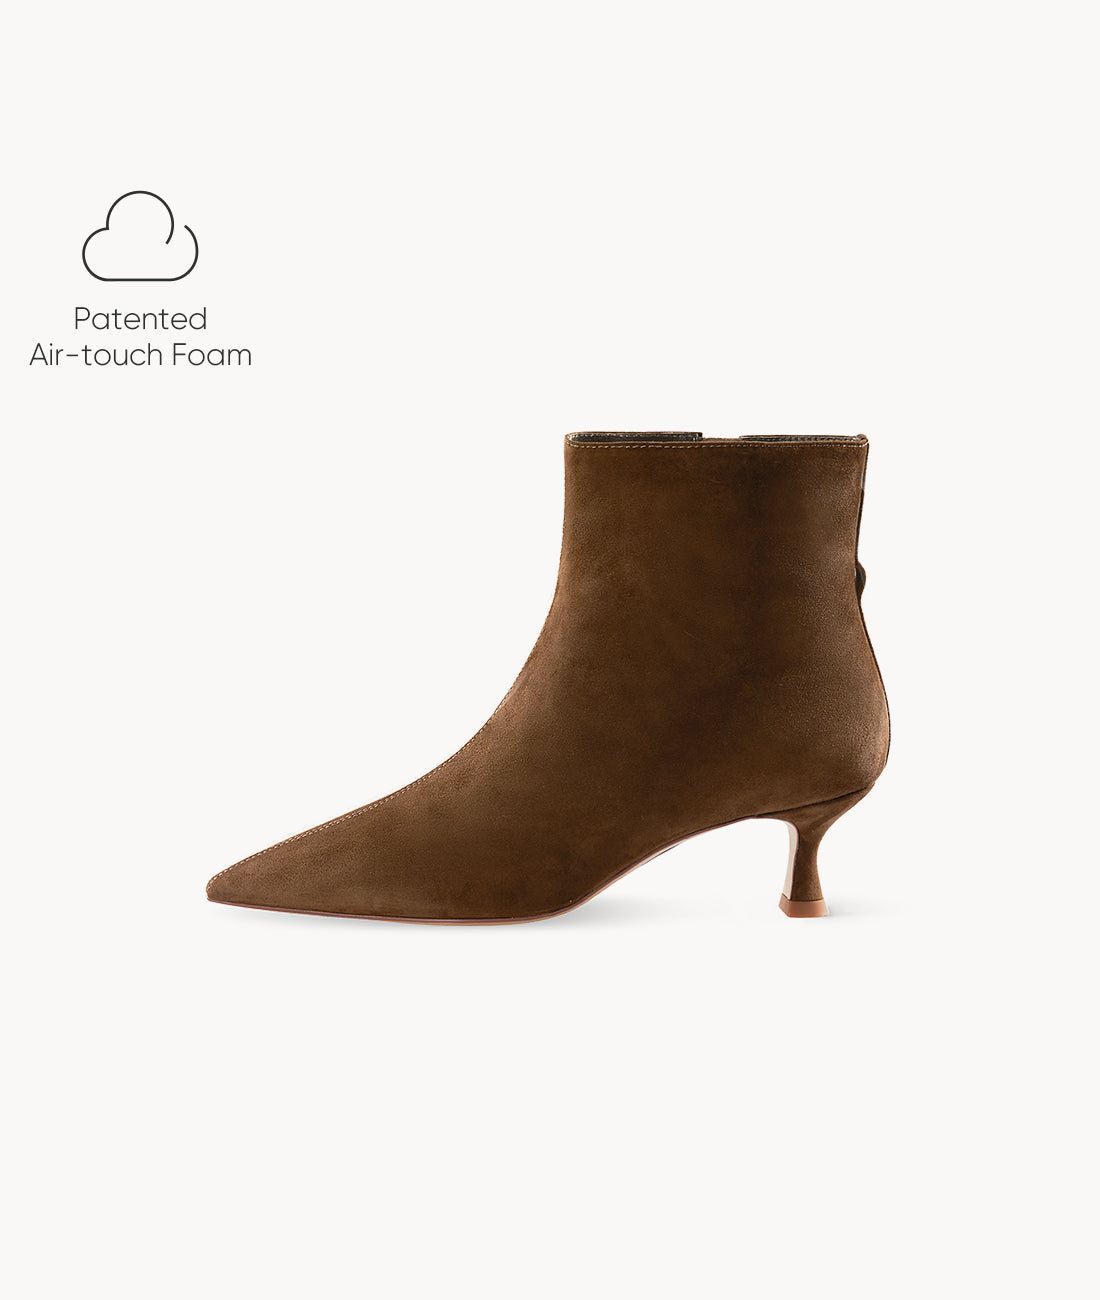 Brown women ankle boots with heels